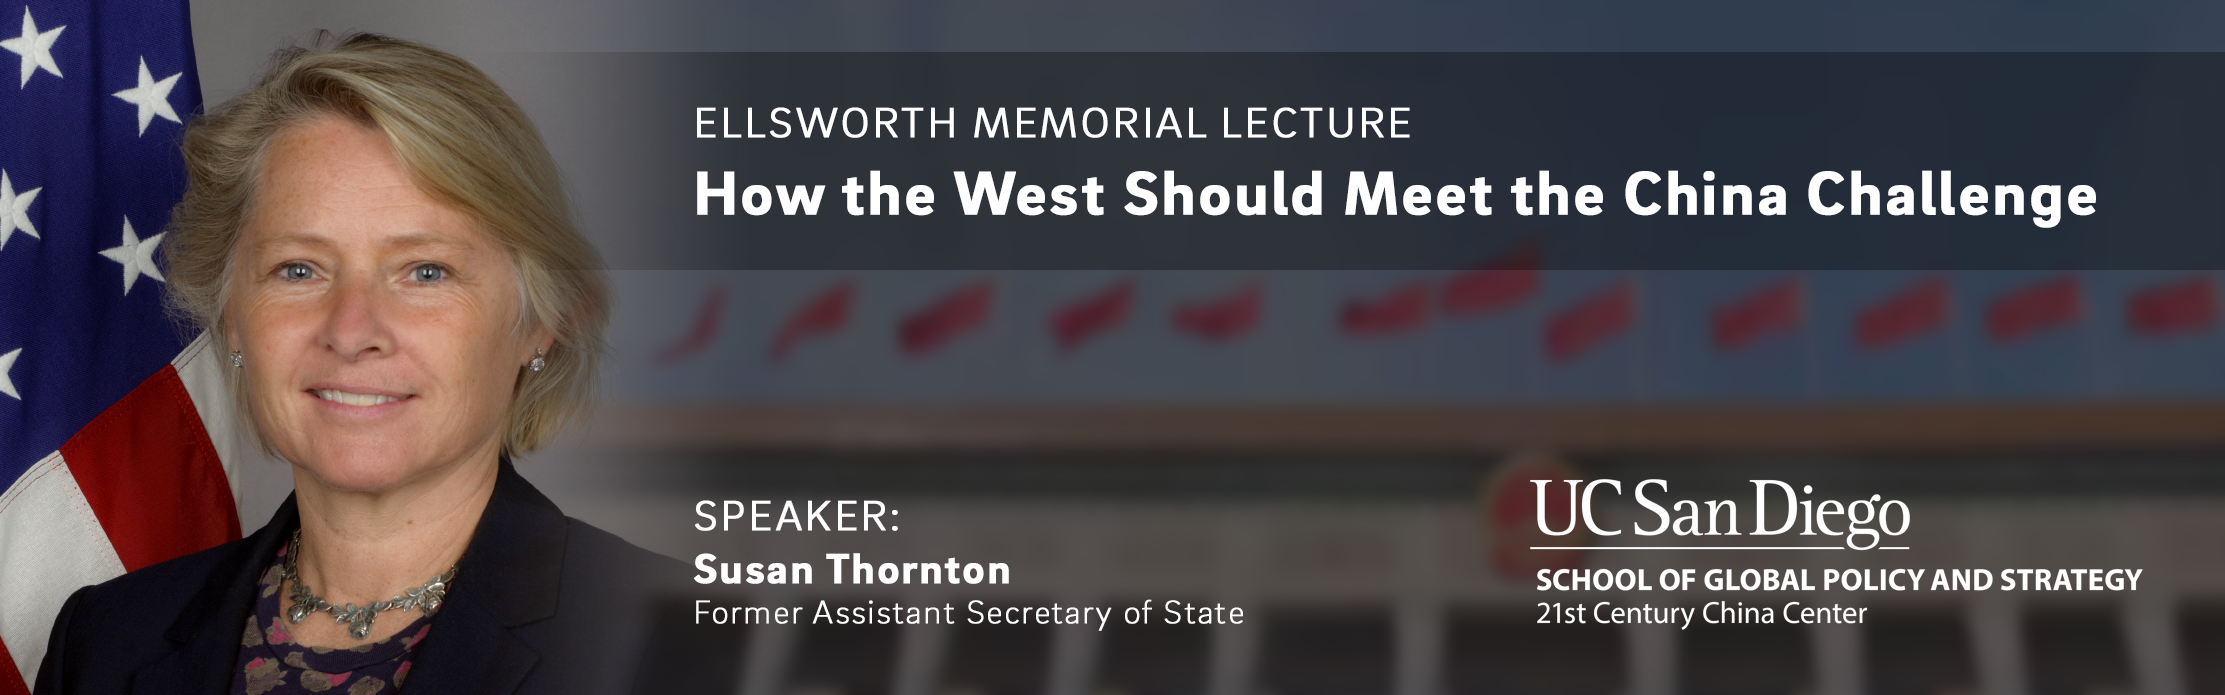 Graphic of banner with speaker and blurred background photography, with text noting the named lecture event for Ellsworth